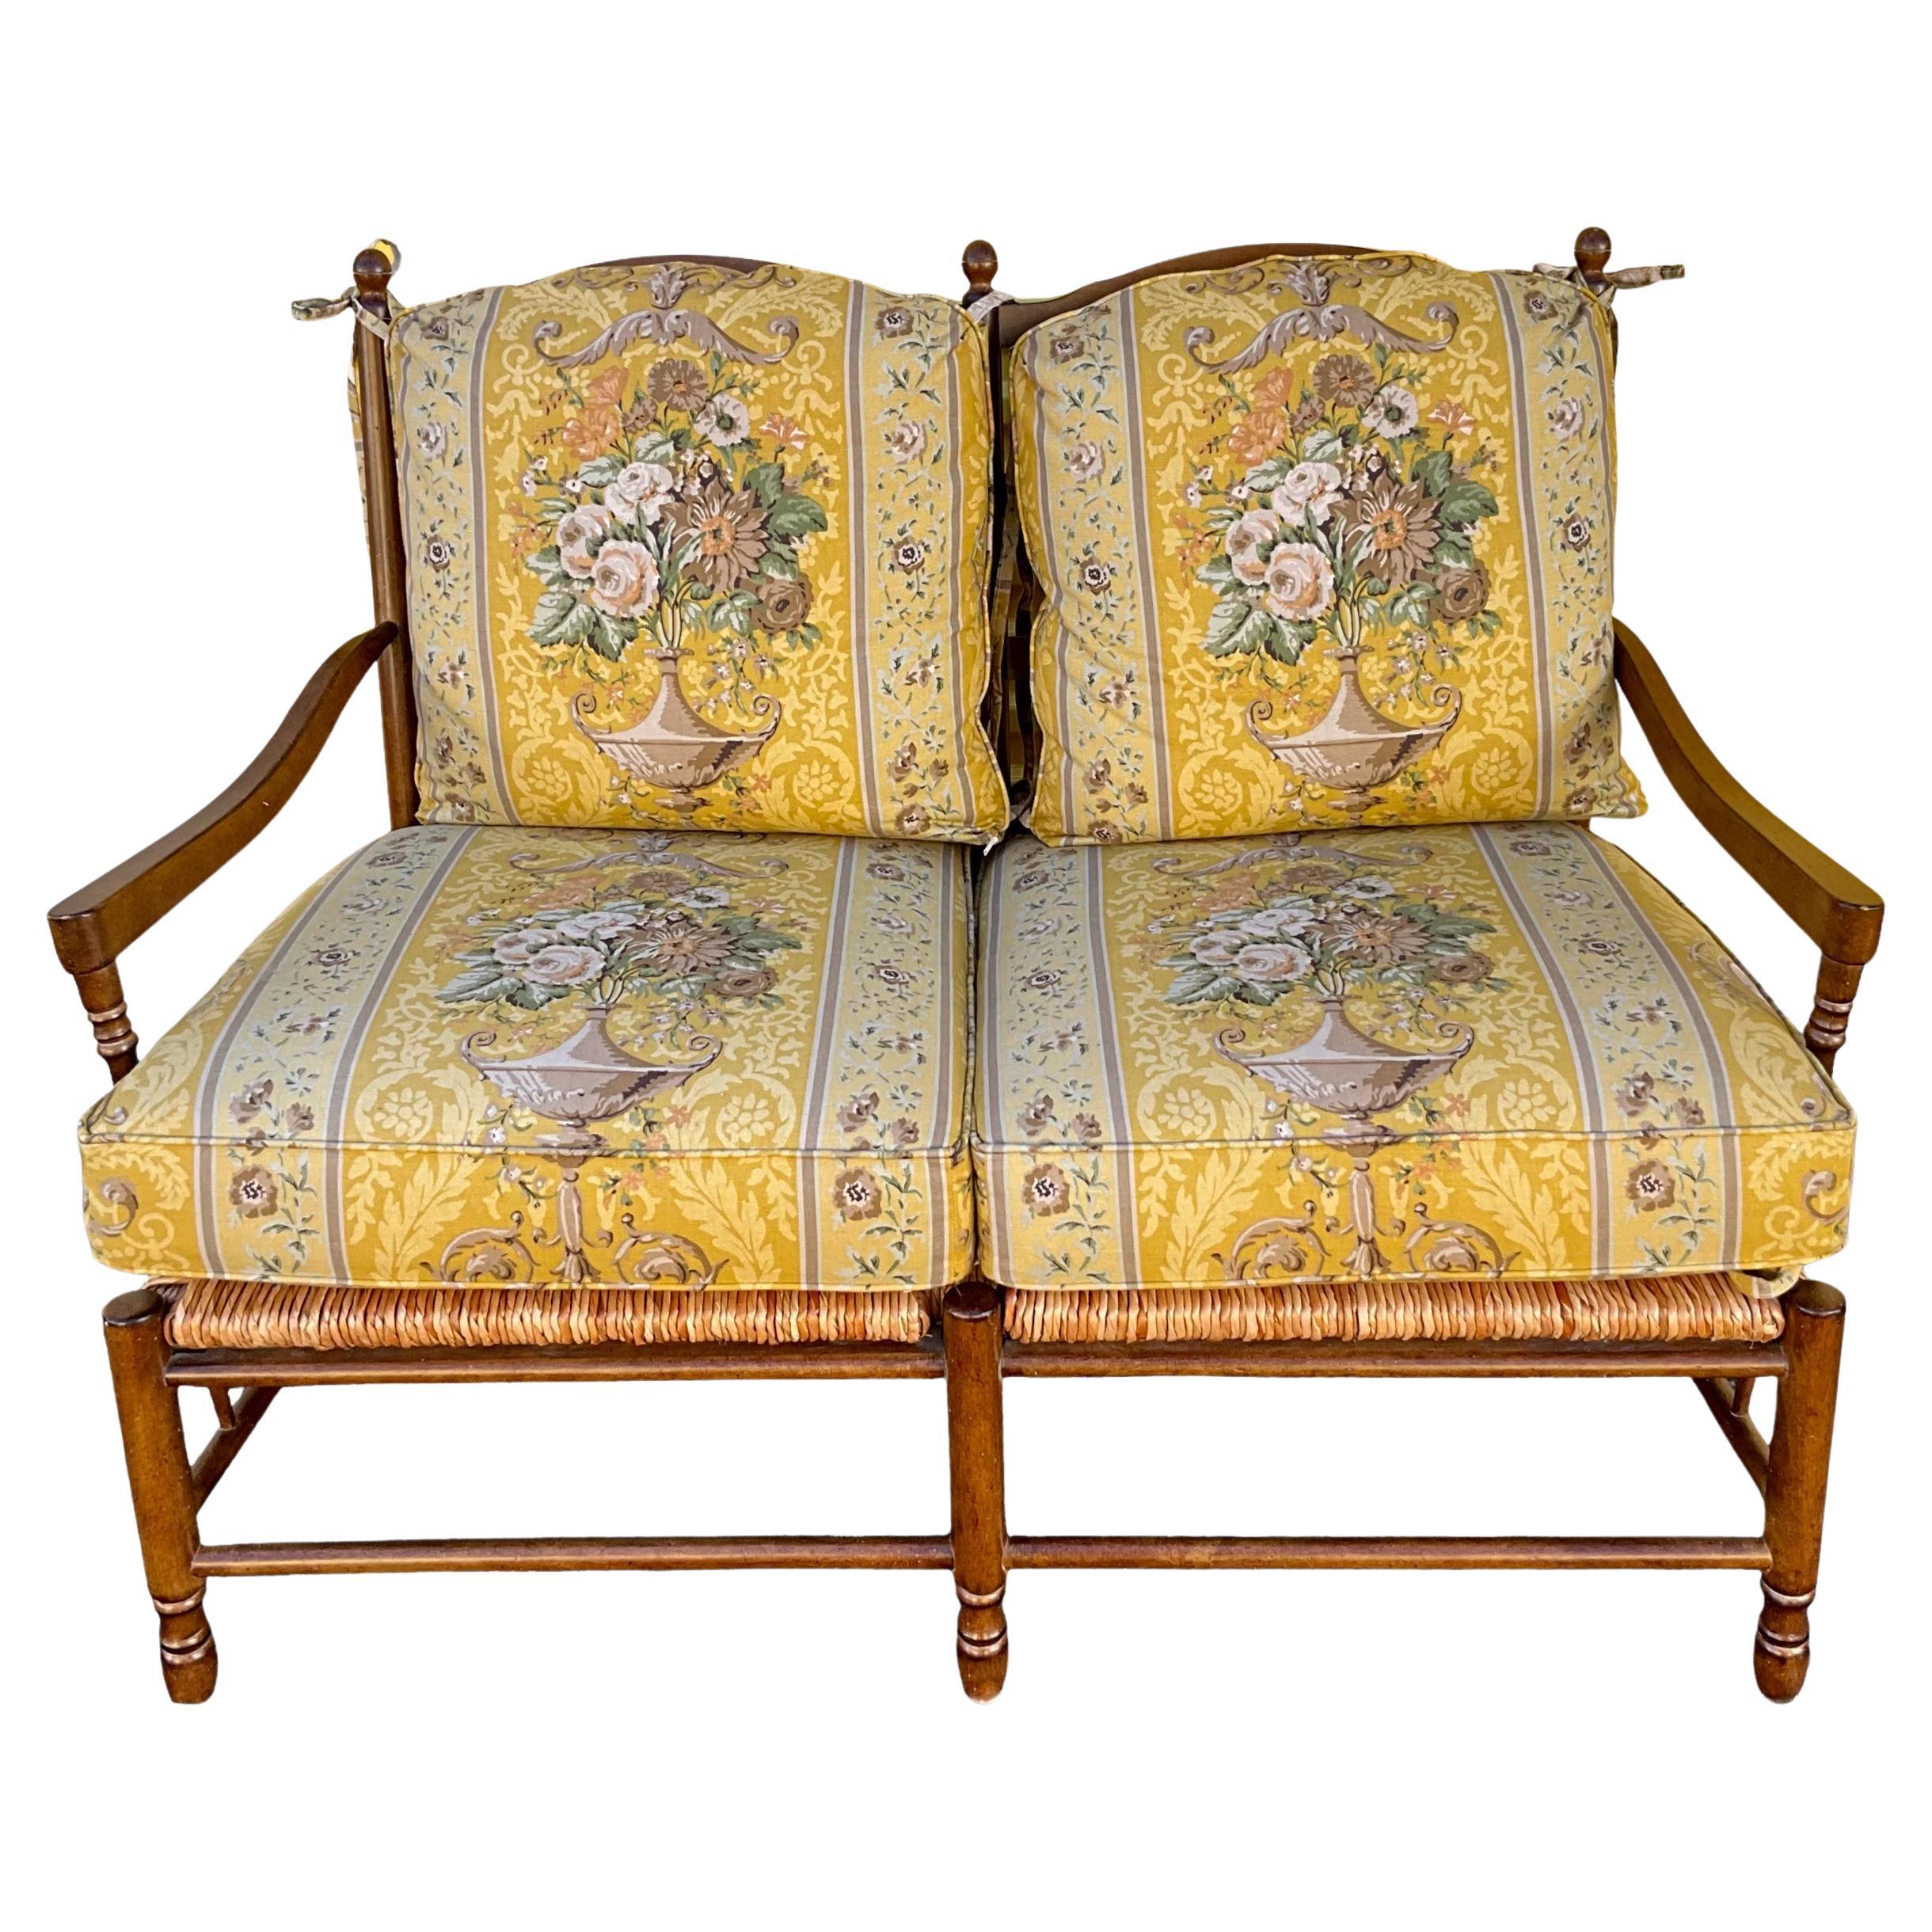 This is a late 20th century French country settee attributed to the manufacturer Pierre Deux. The frame appears to be maple with a sound rush seat. The neo-classical striped fabric is in very good condition. It has light wear and is unmarked. The